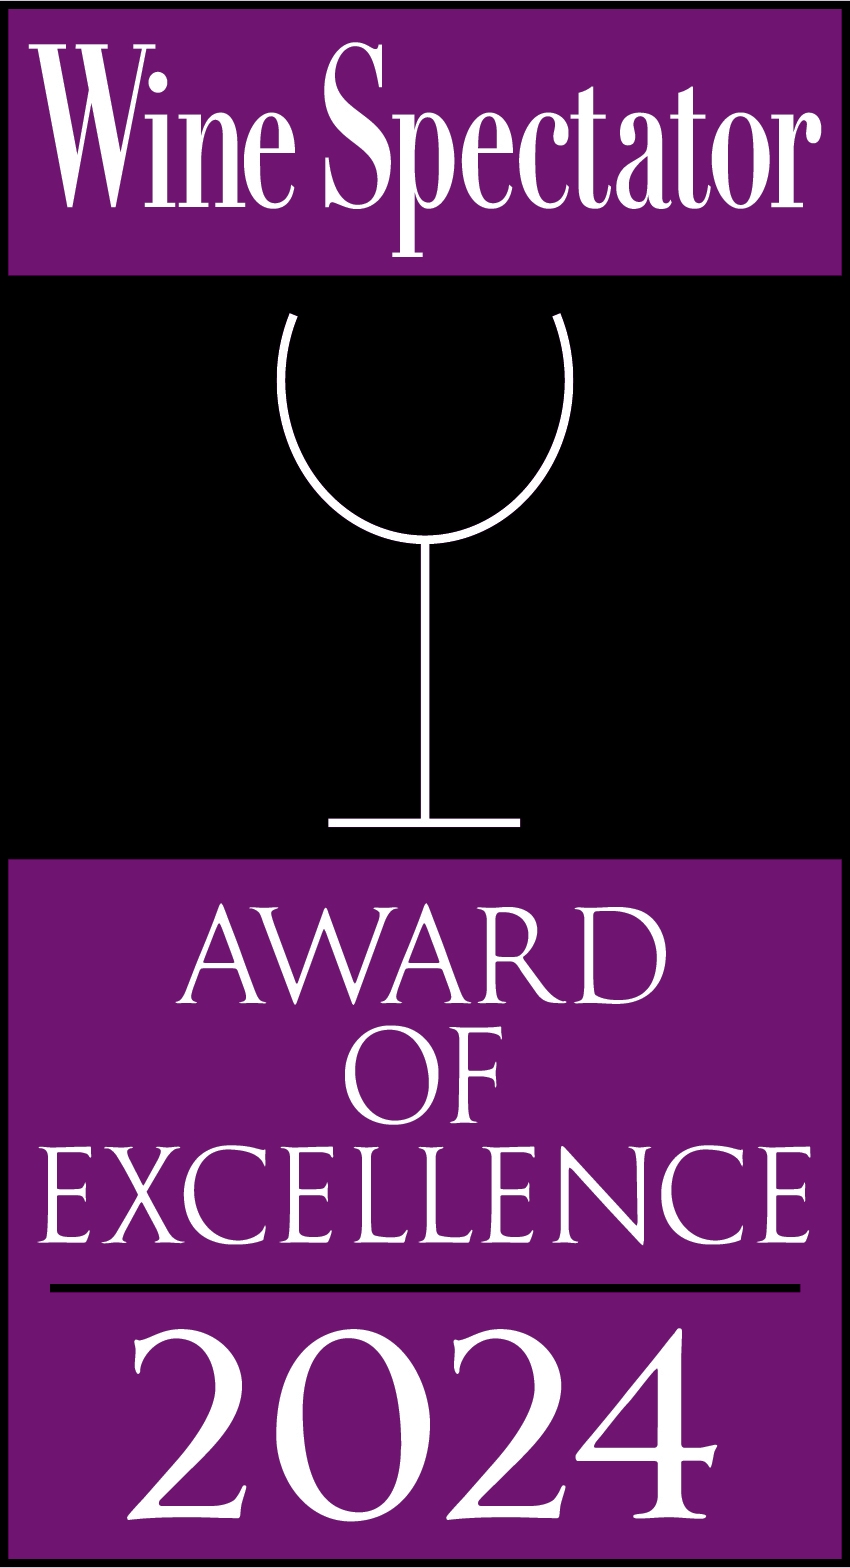 Wine Spectator 2024 - Award of Excellence